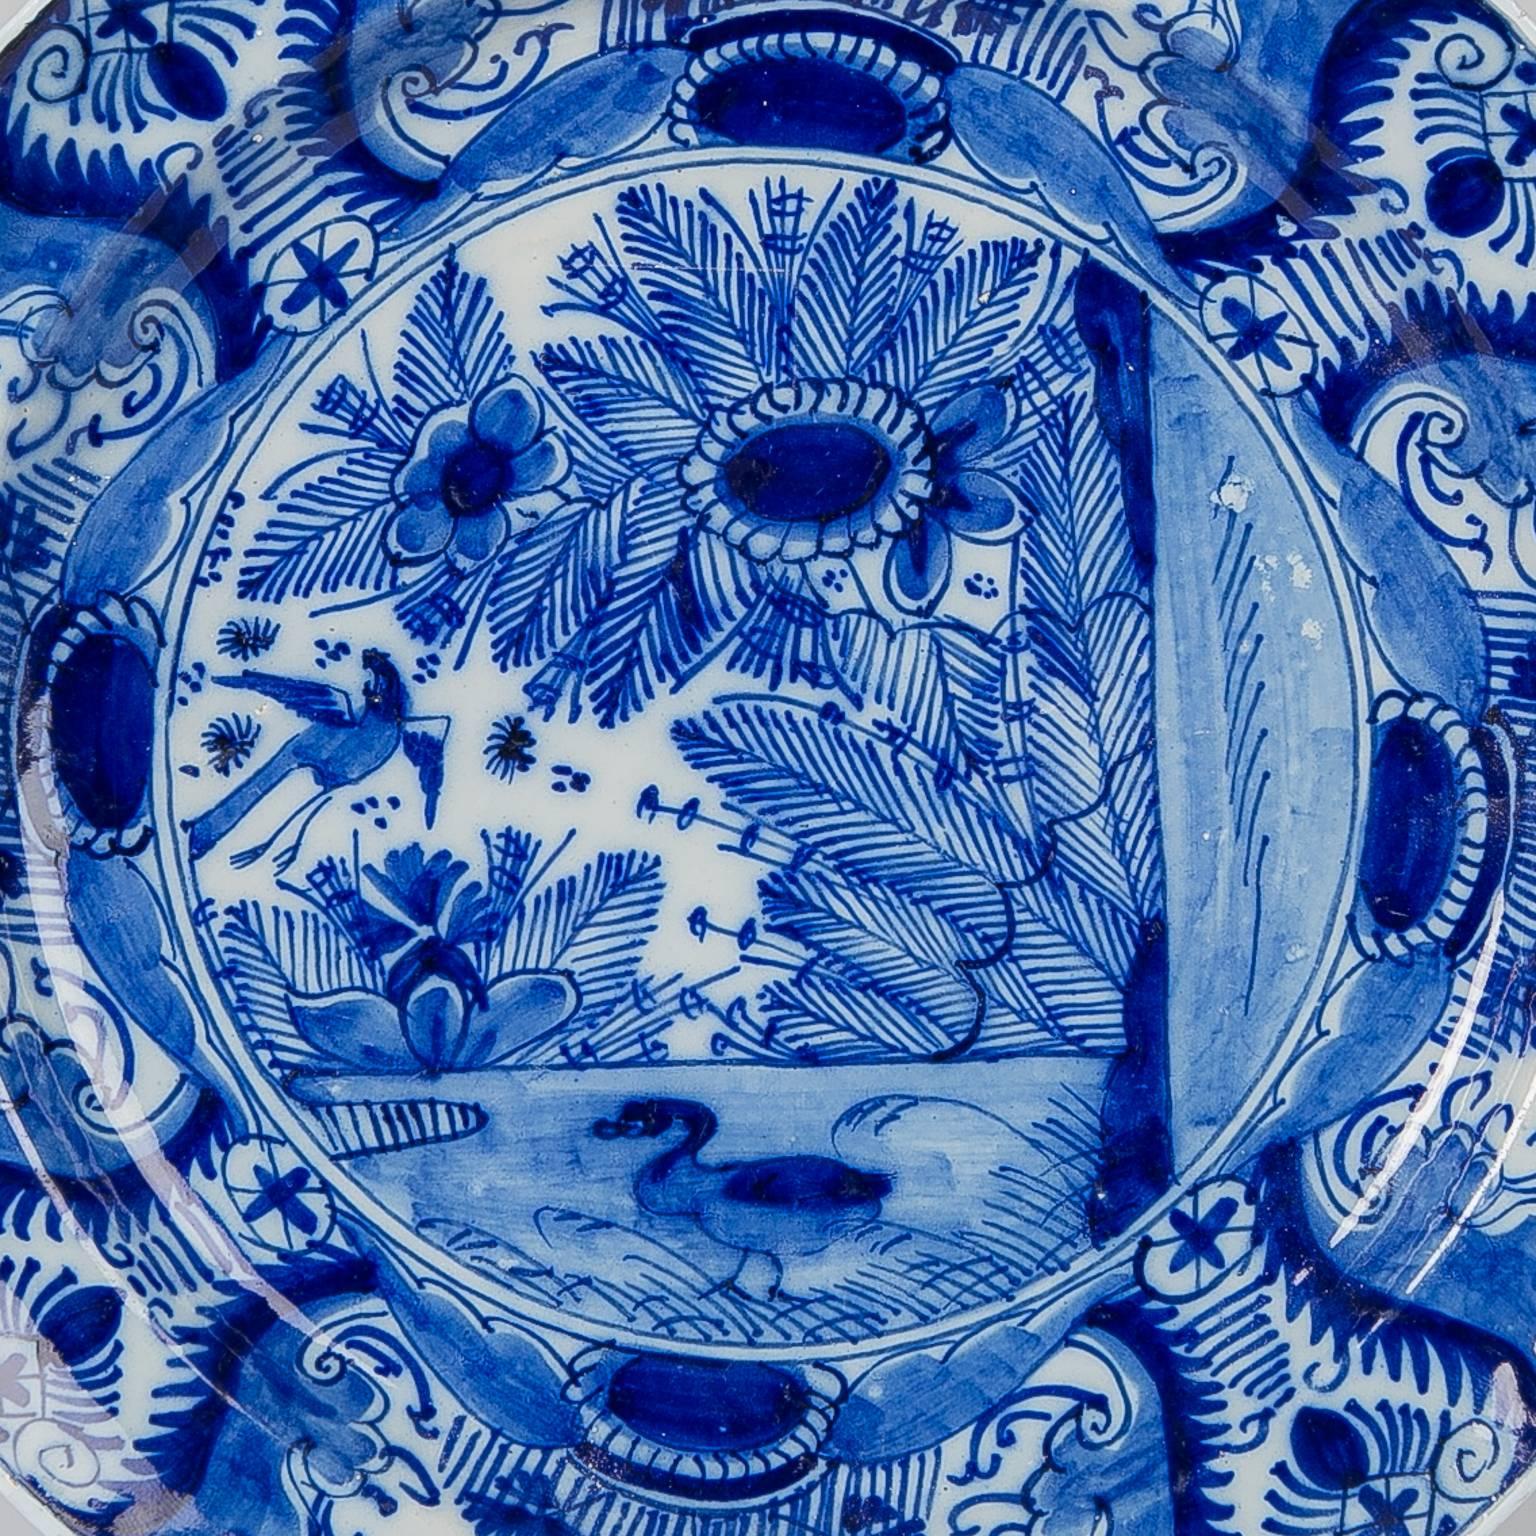 A Dutch Delft 10 inch charger where the center shows a beautiful, lively, and very detailed ducks-in-a-pond scene with giant flowers overhanging the edge of the pond, a duck swimming, and a long-tailed bird flying above. The scene and the